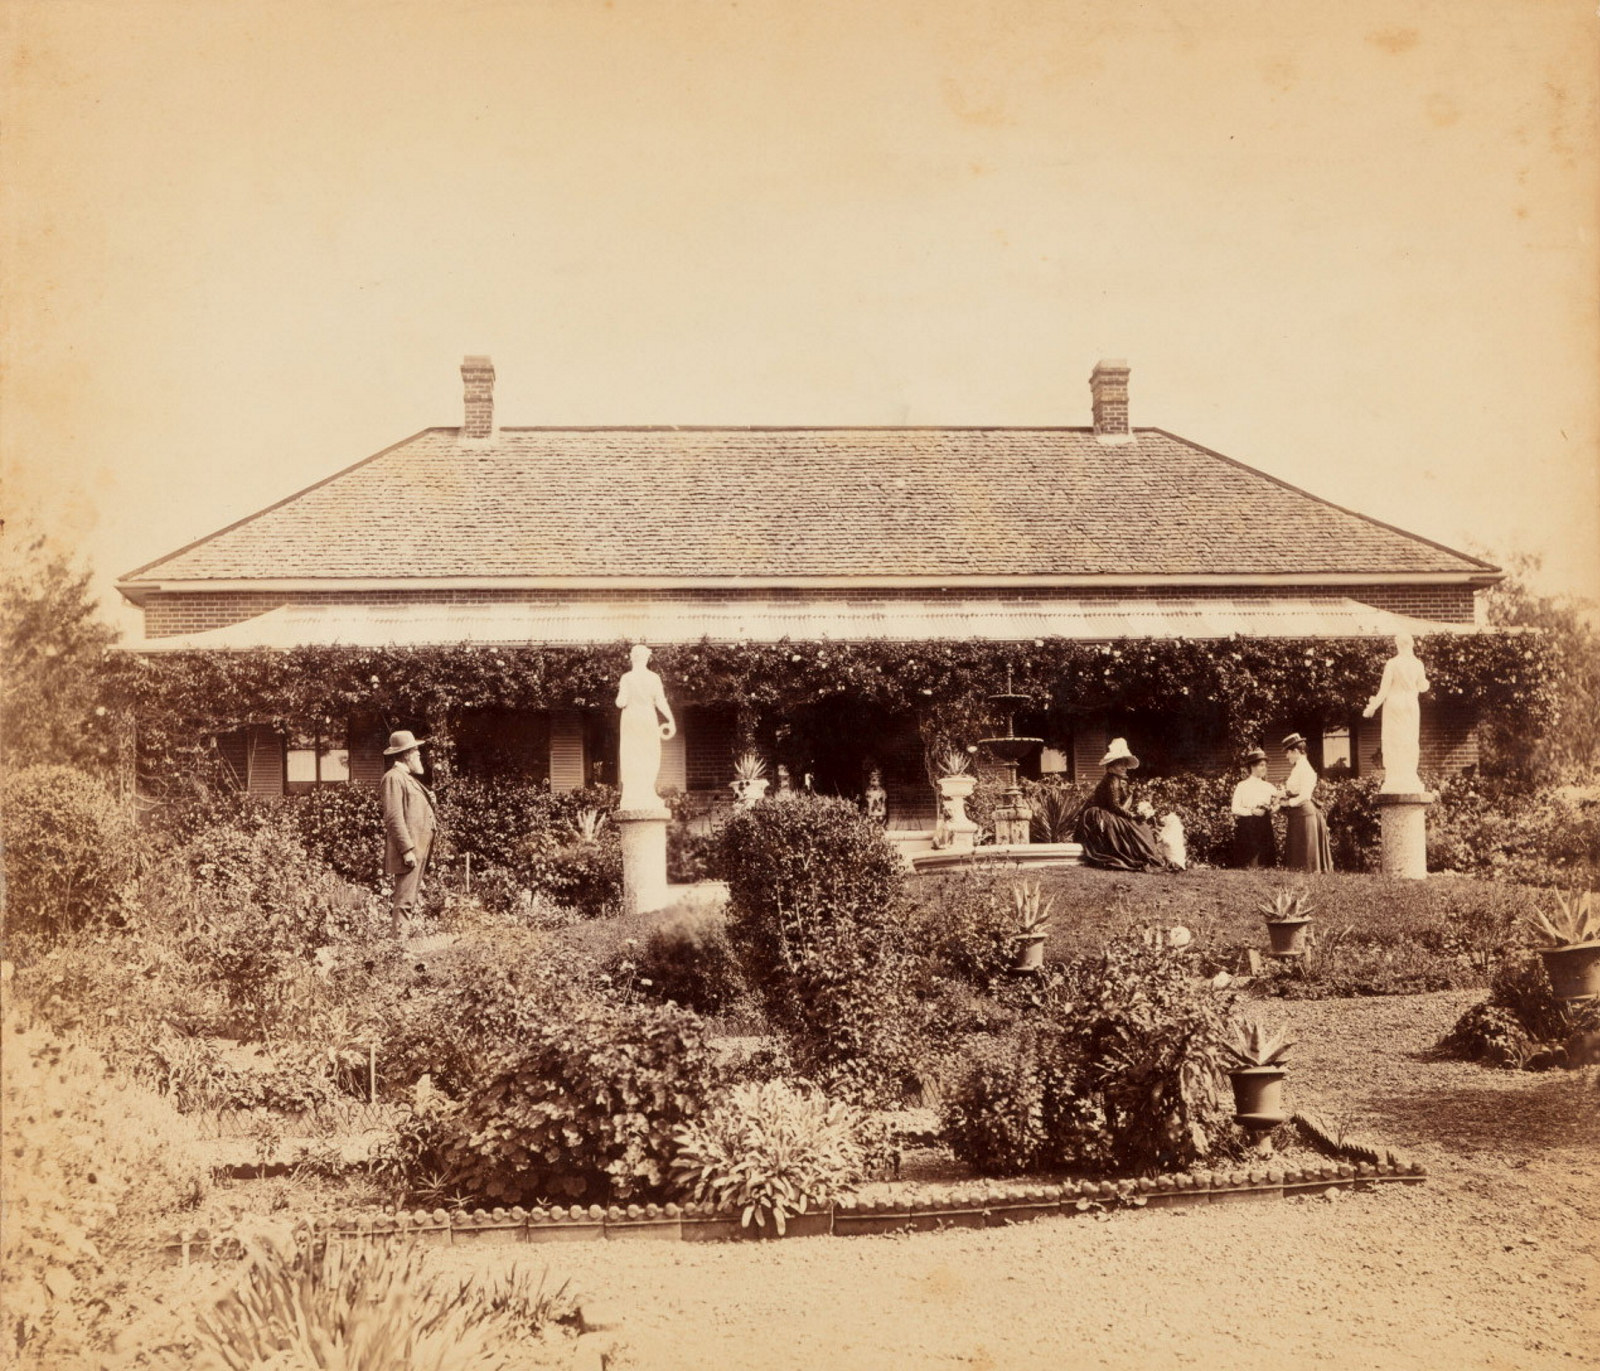 Cook family in the garden in front of Turanville near Scone / photograpjed by Joseph Check, 1889.